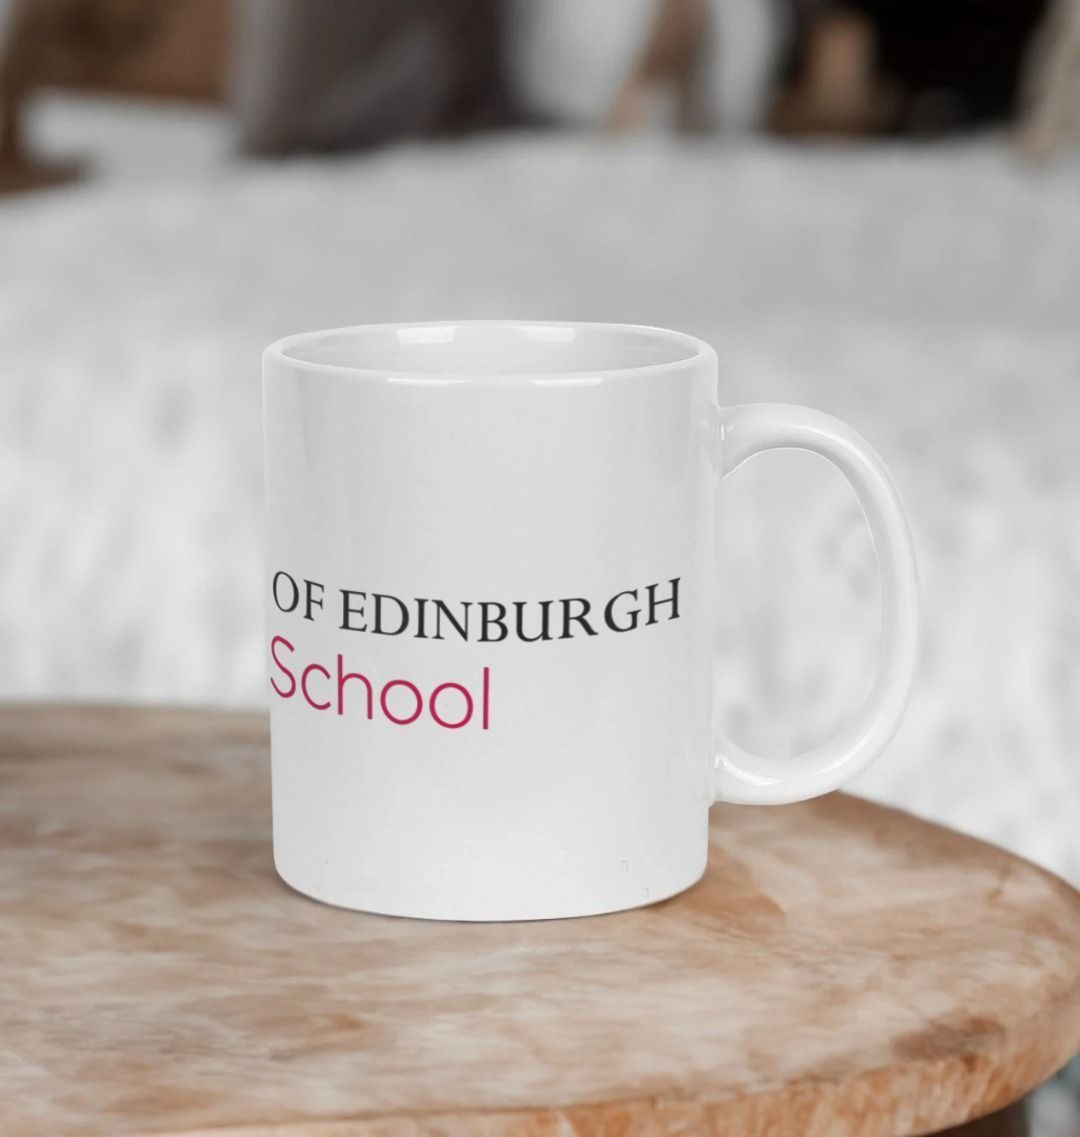 White Business School Mug with multi-colour printed University crest and logo